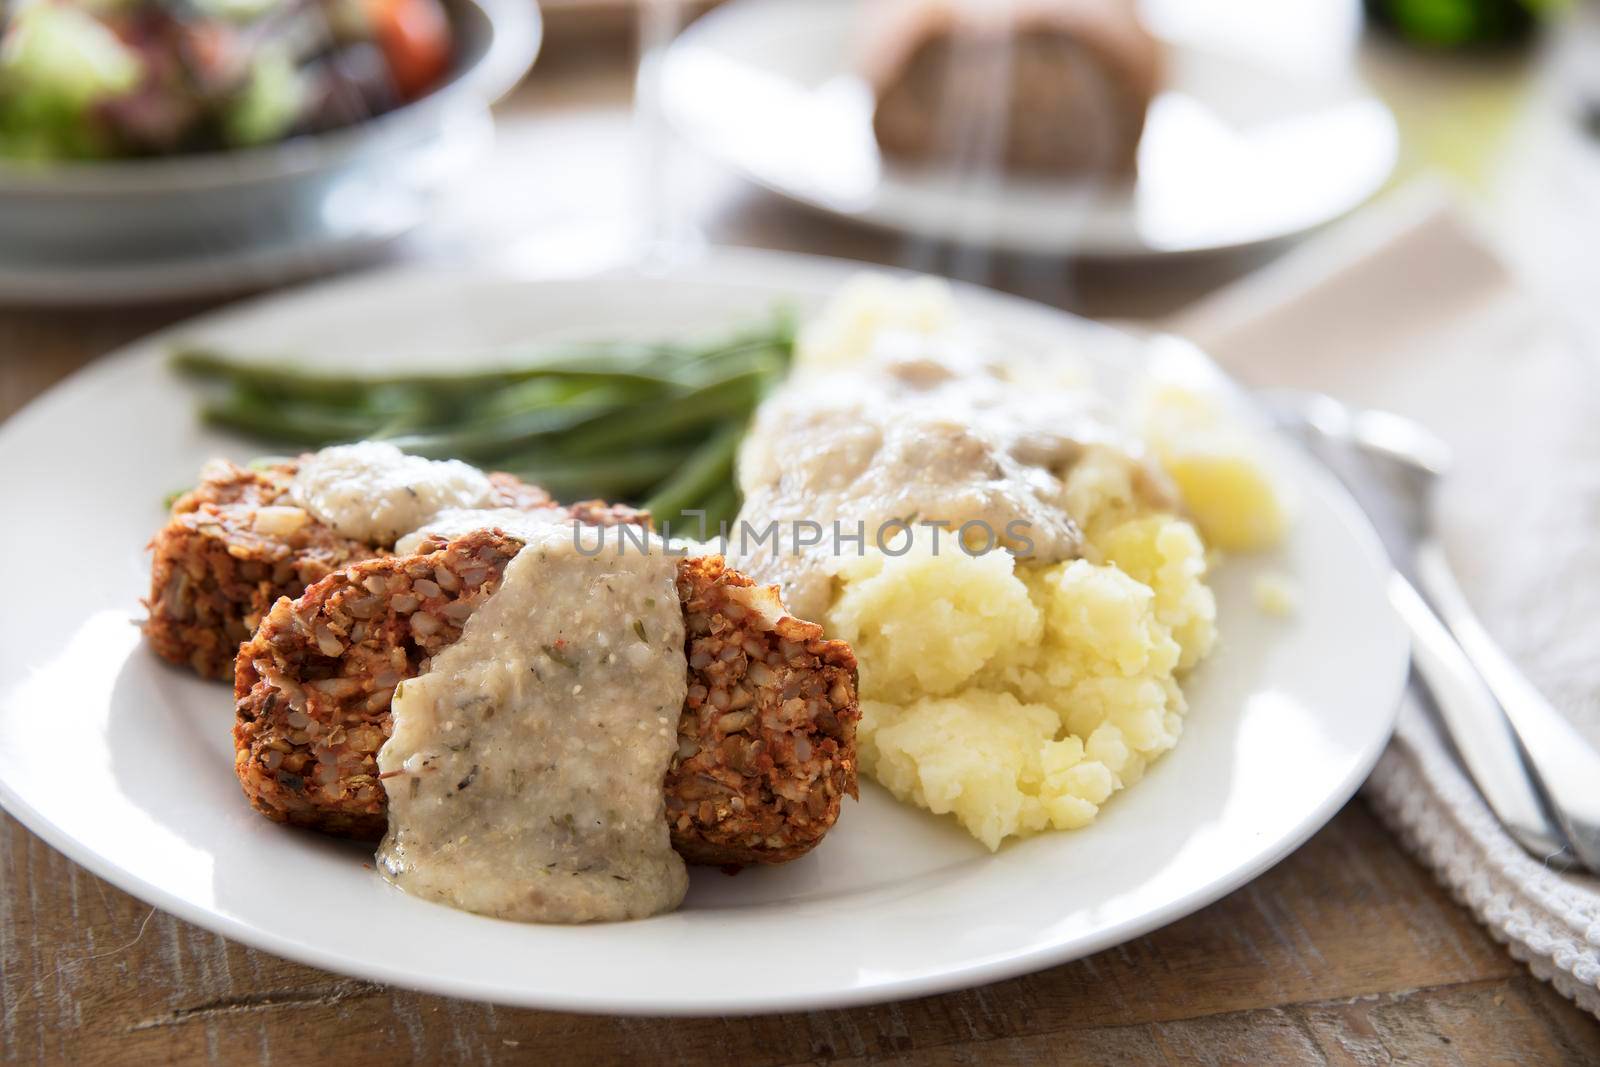 Slices of vegan lentil loaf covered in gravy with mashed potatoes and green beans.